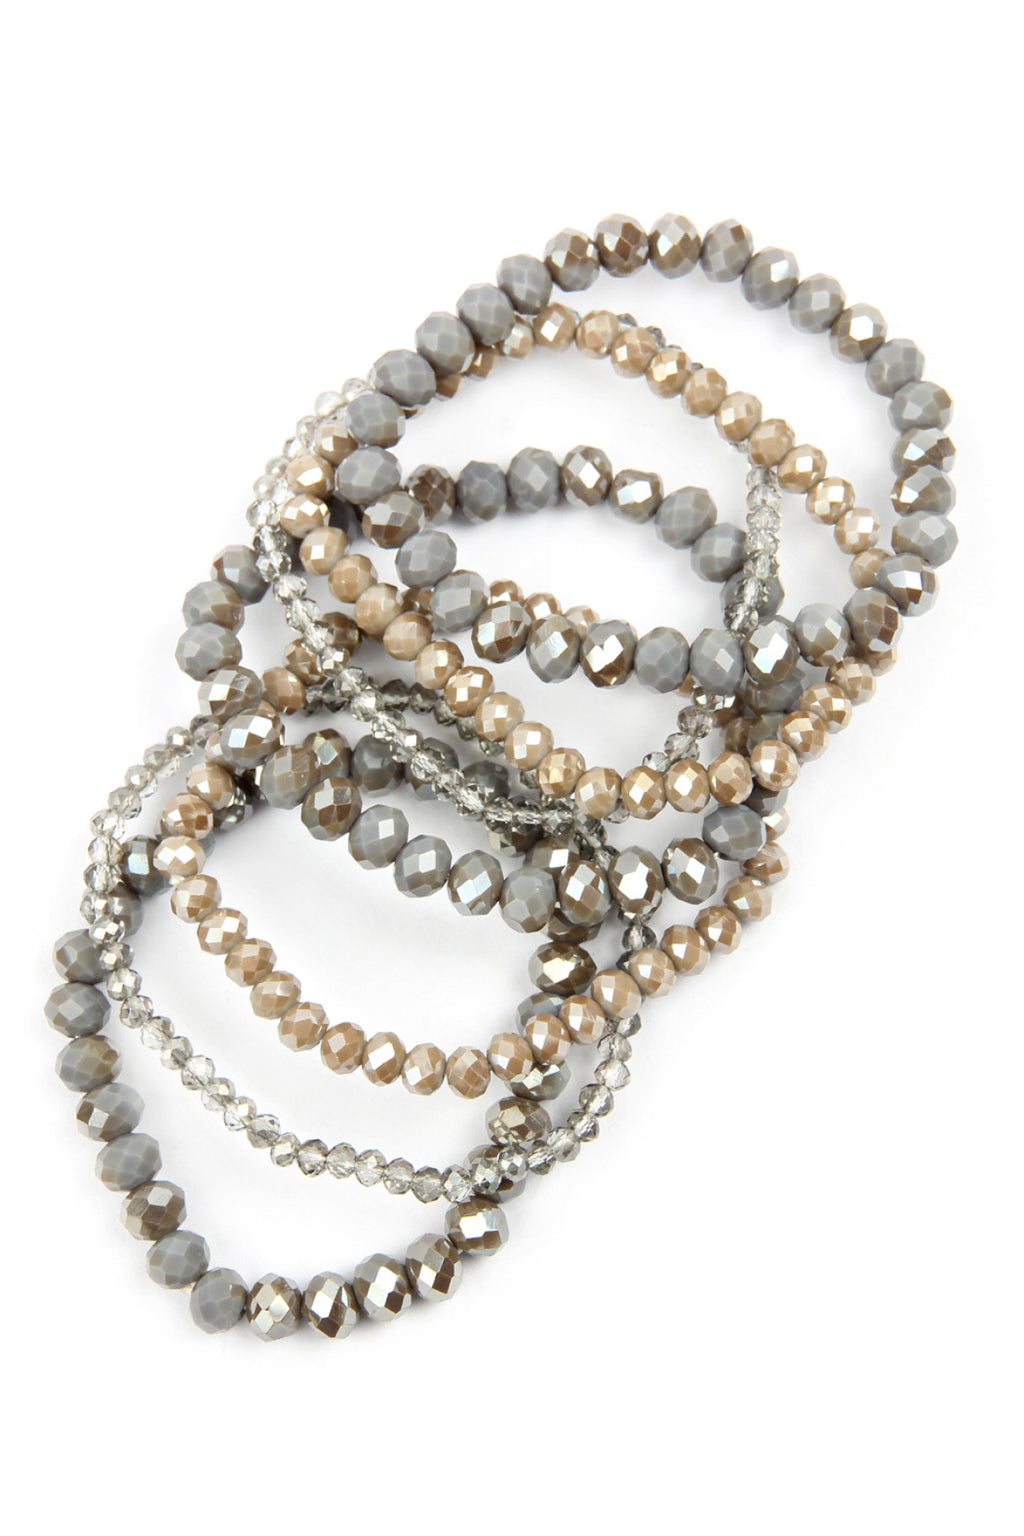 Gray Seven Lines Glass Beads Stretch Bracelet - Pack of 6